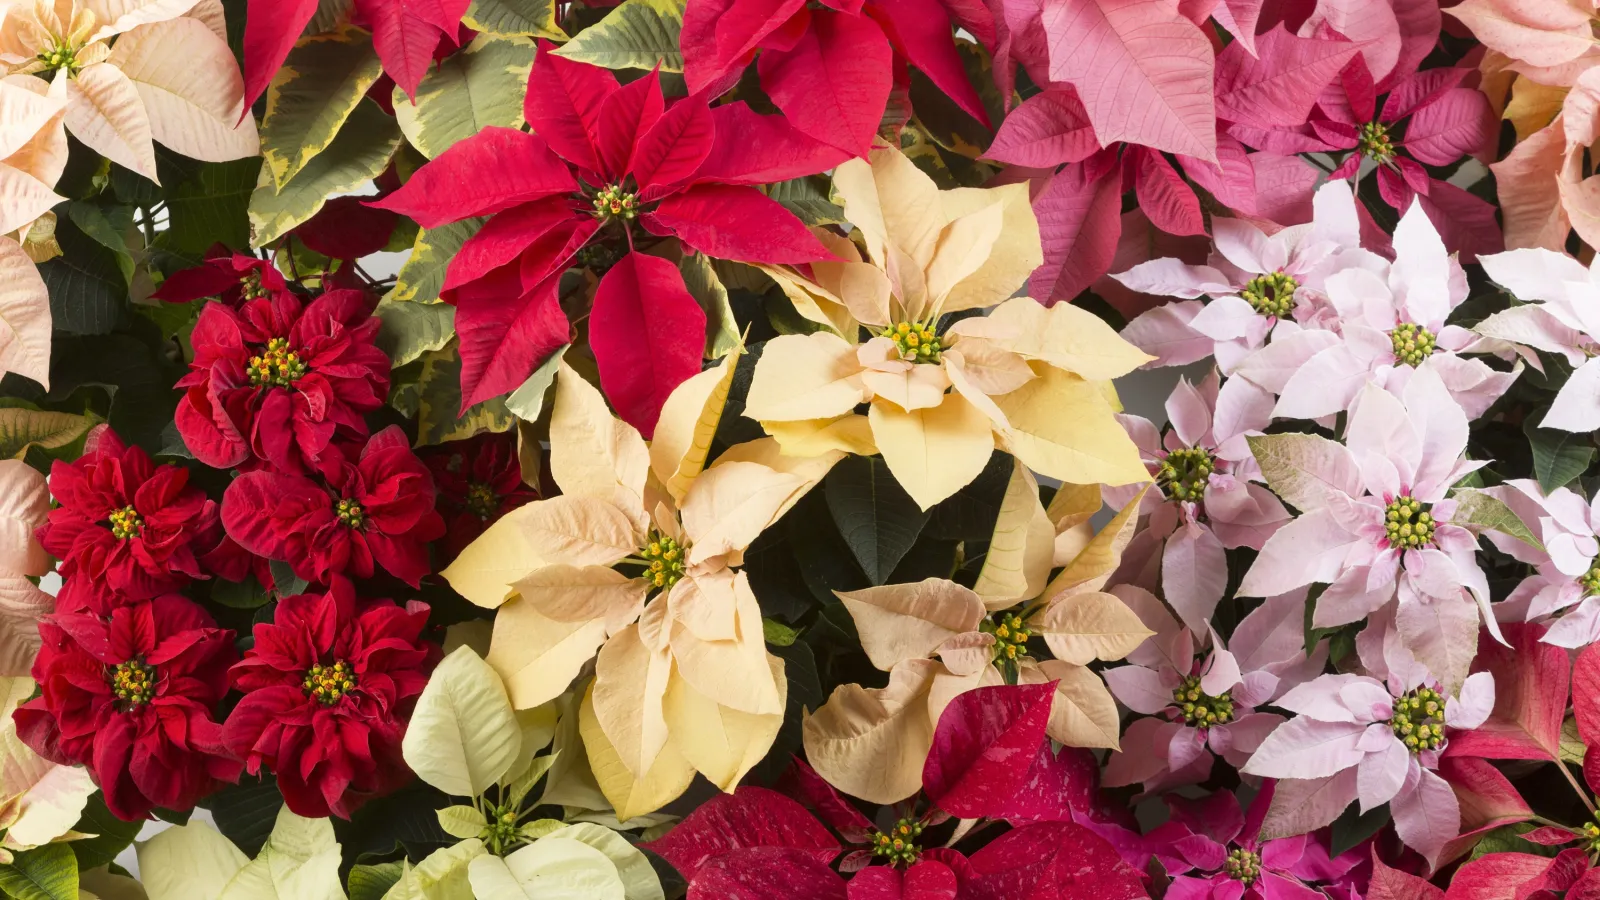 a collection of different colored poinsettias grouped together